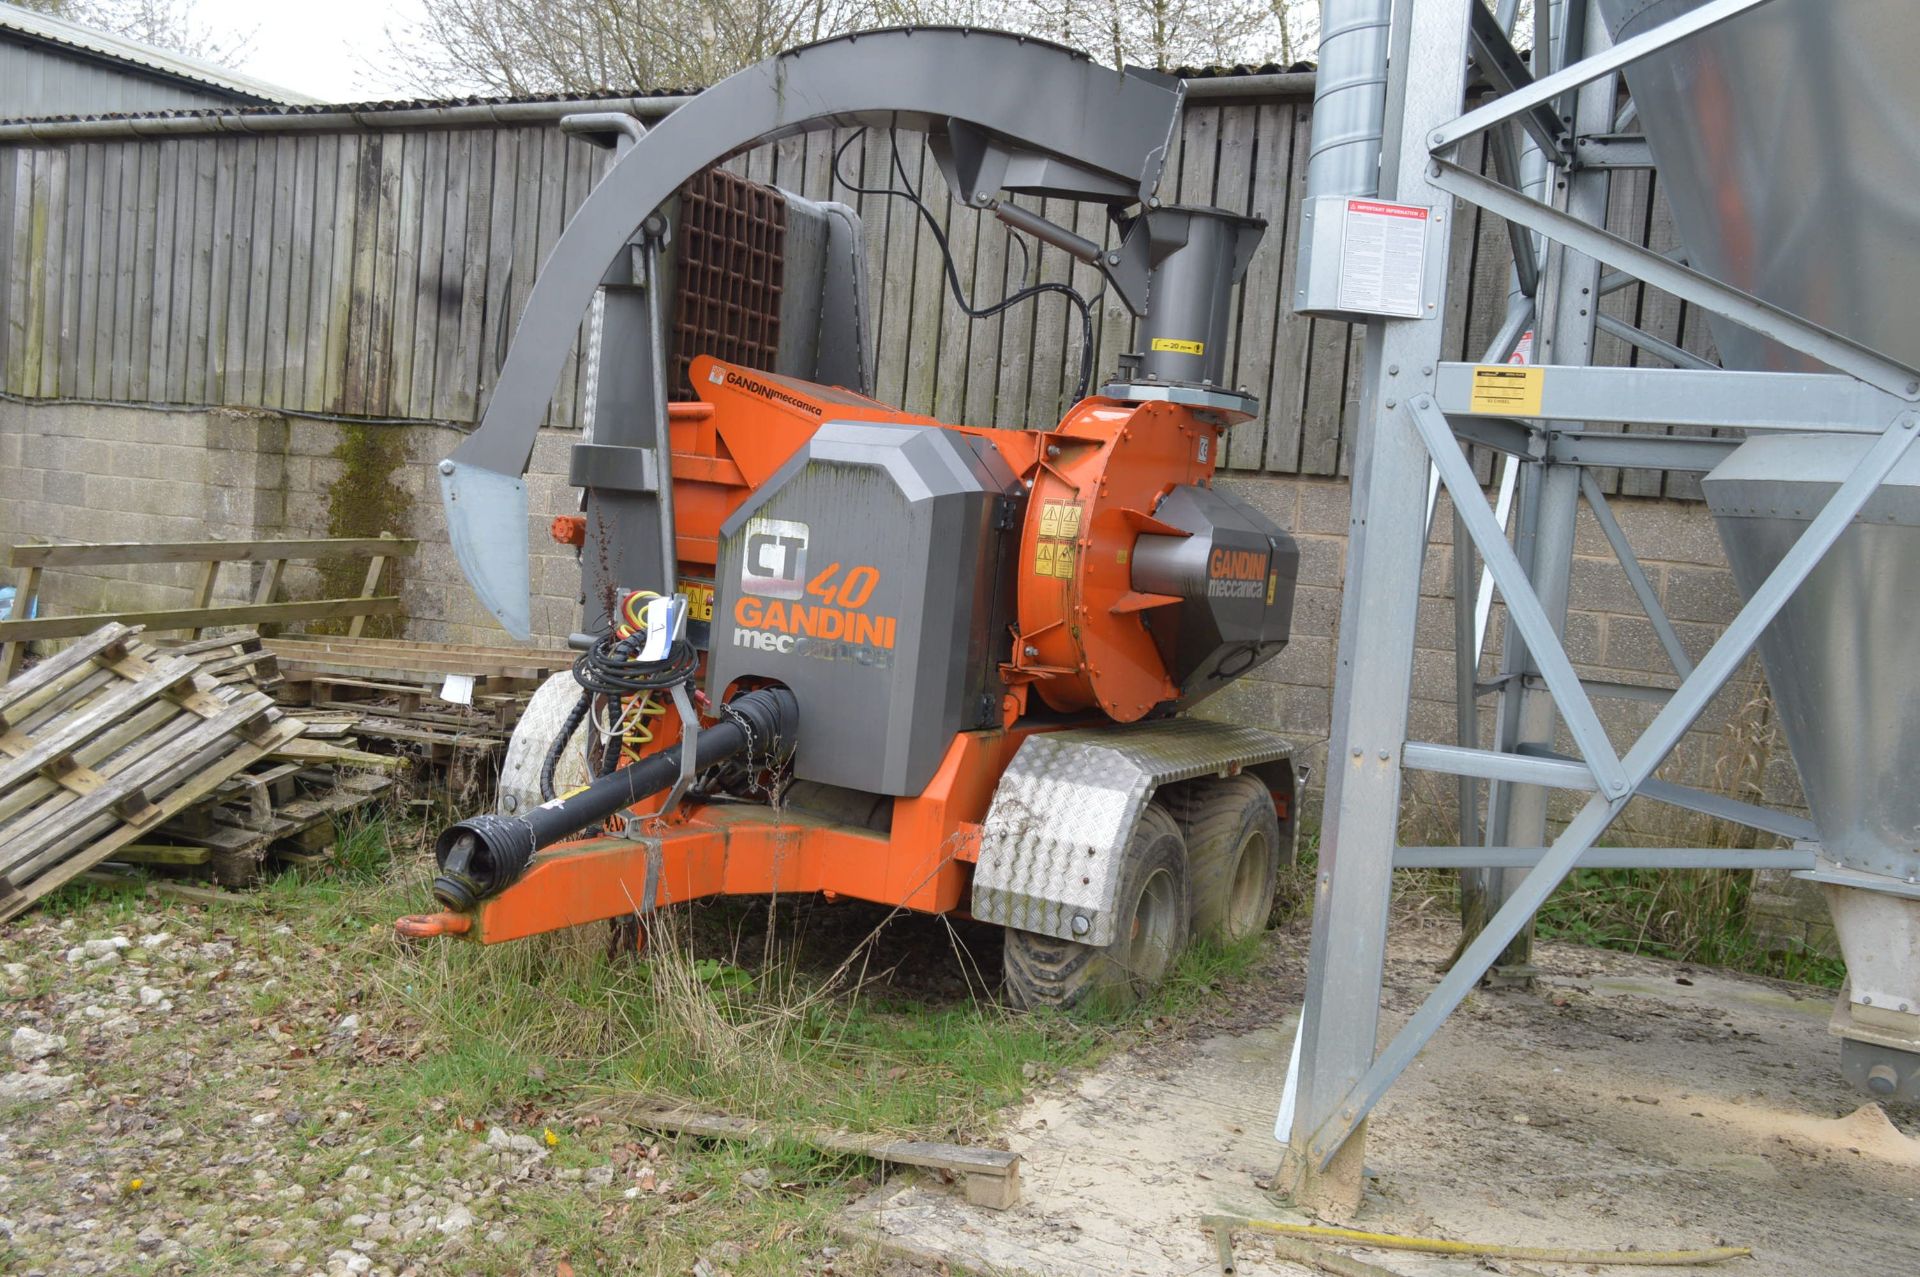 Gandini Meccanica CT40/75TTS MOBILE WOOD CHIPPER, serial no. CT40453, year of manufacture 2014, with - Image 2 of 11